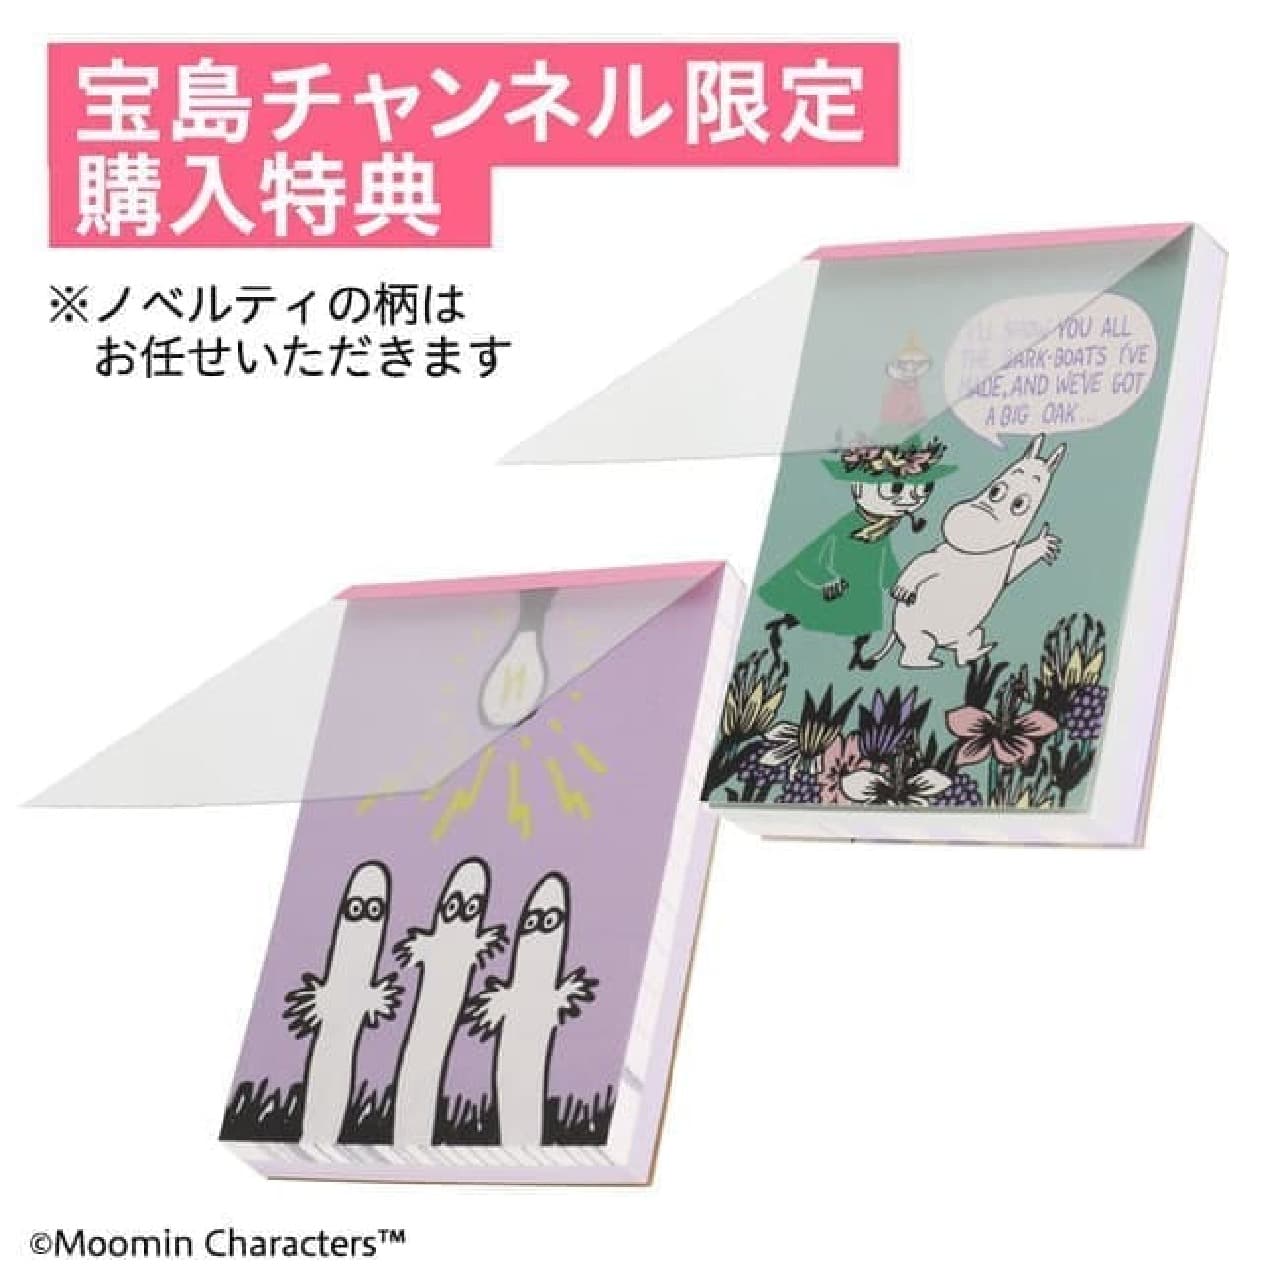 "Adult Fashionable Notebook" October issue Appendix is Moomin --Nyoro Nyoro's Panque Frying Pan